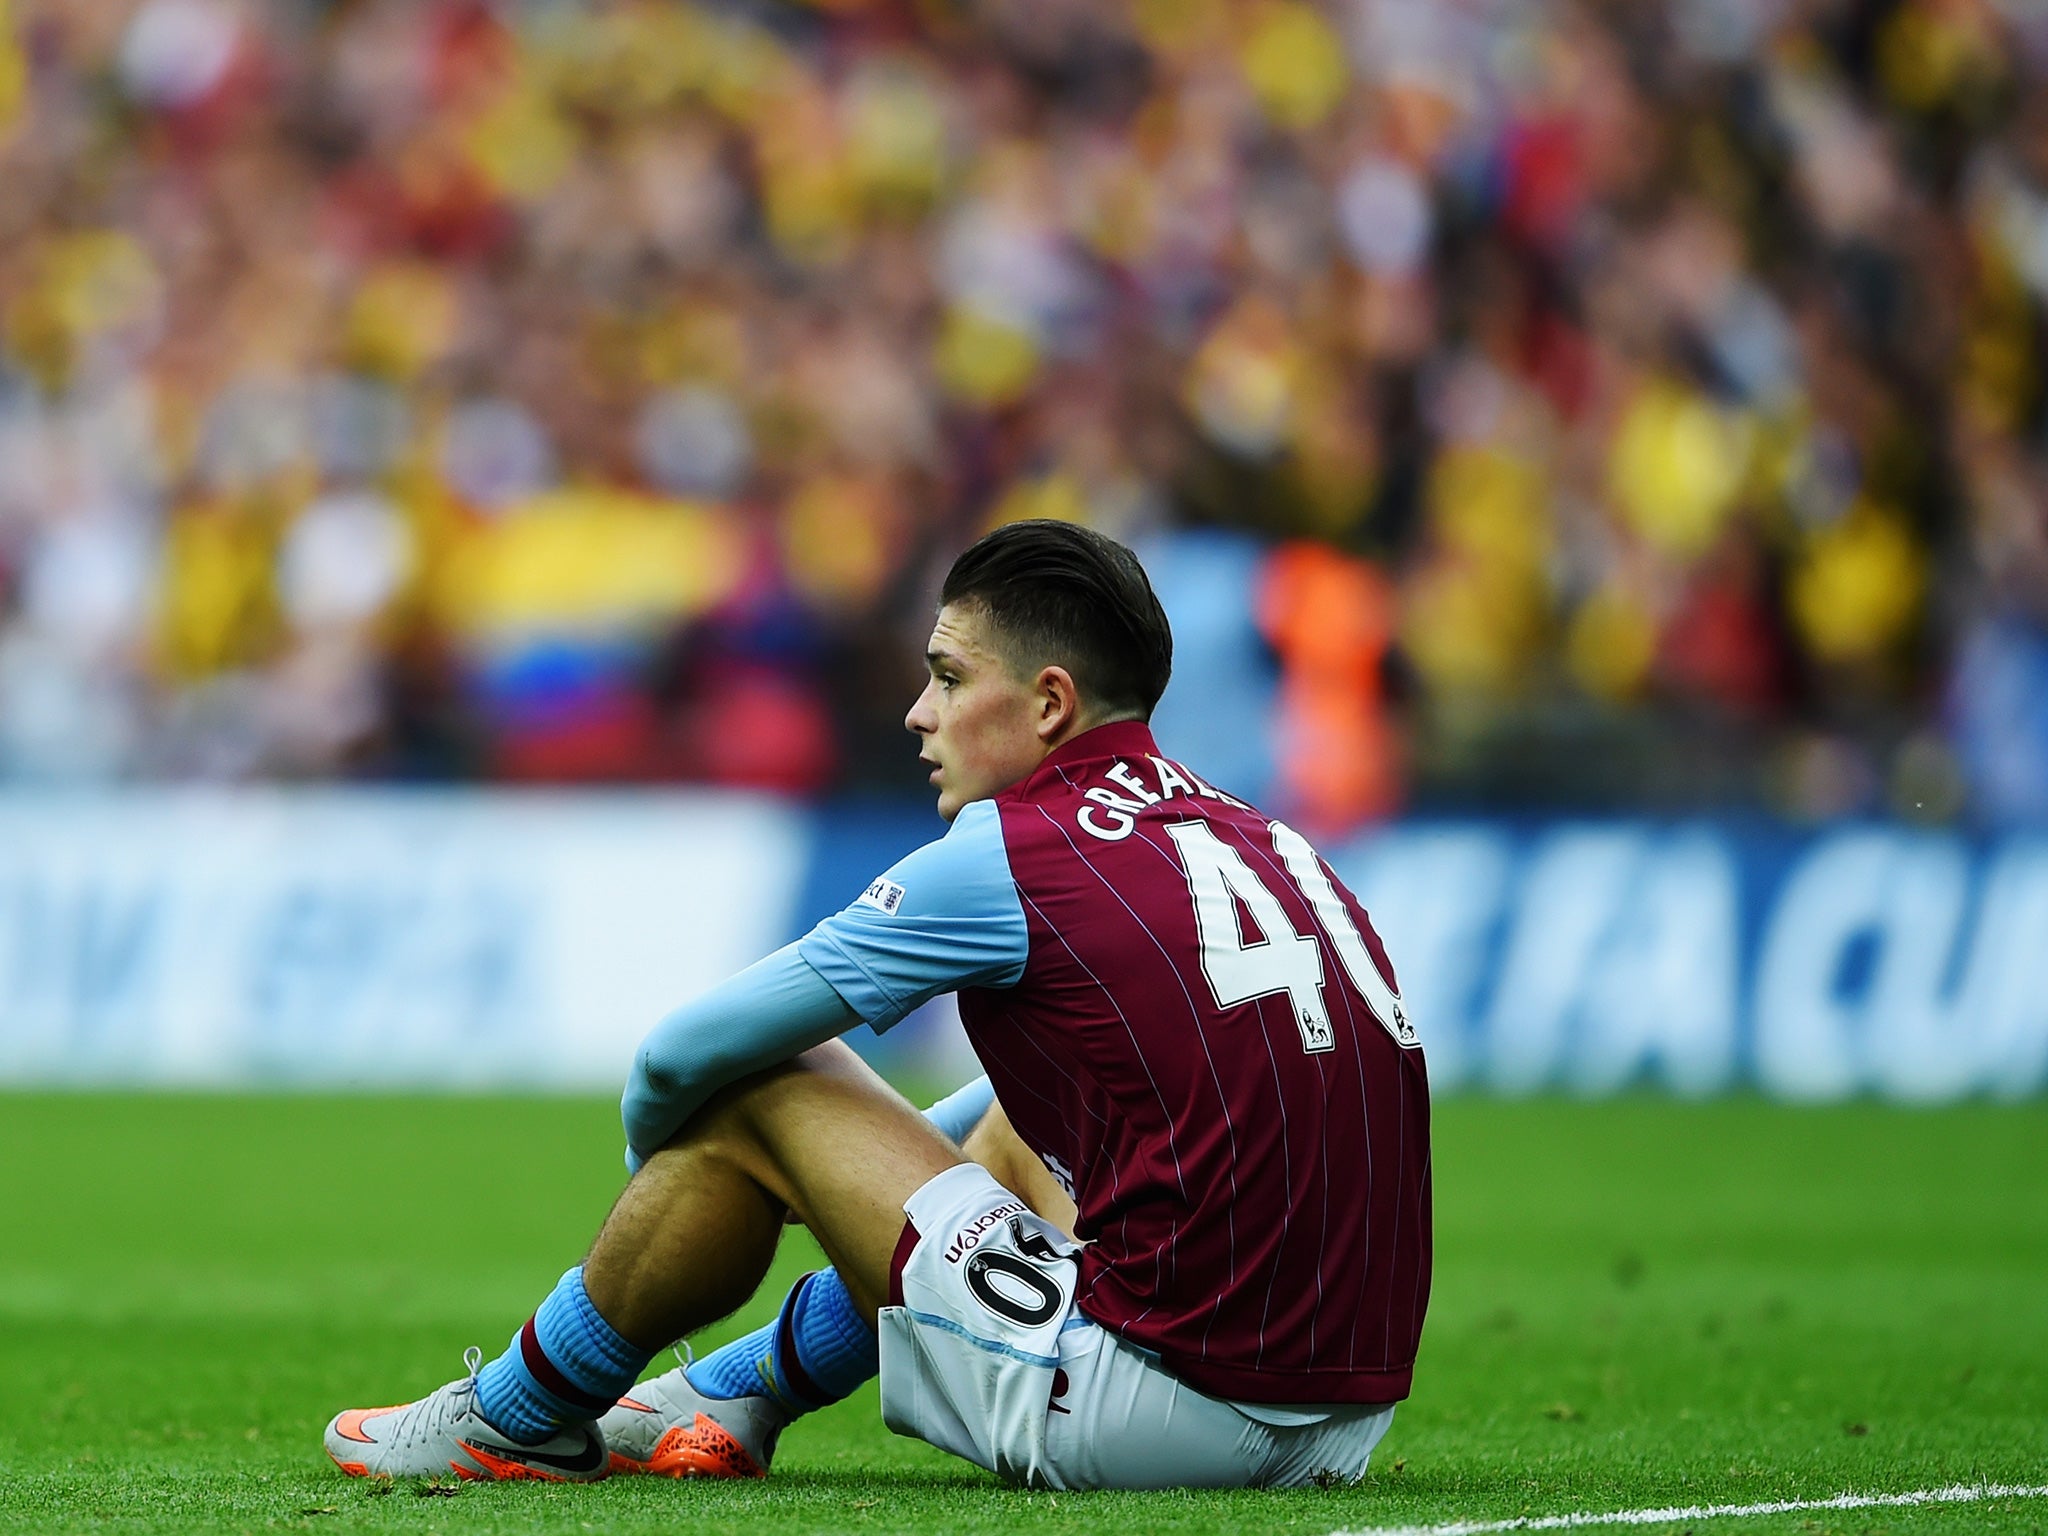 Jack Grealish is fit again after missing the start of the season